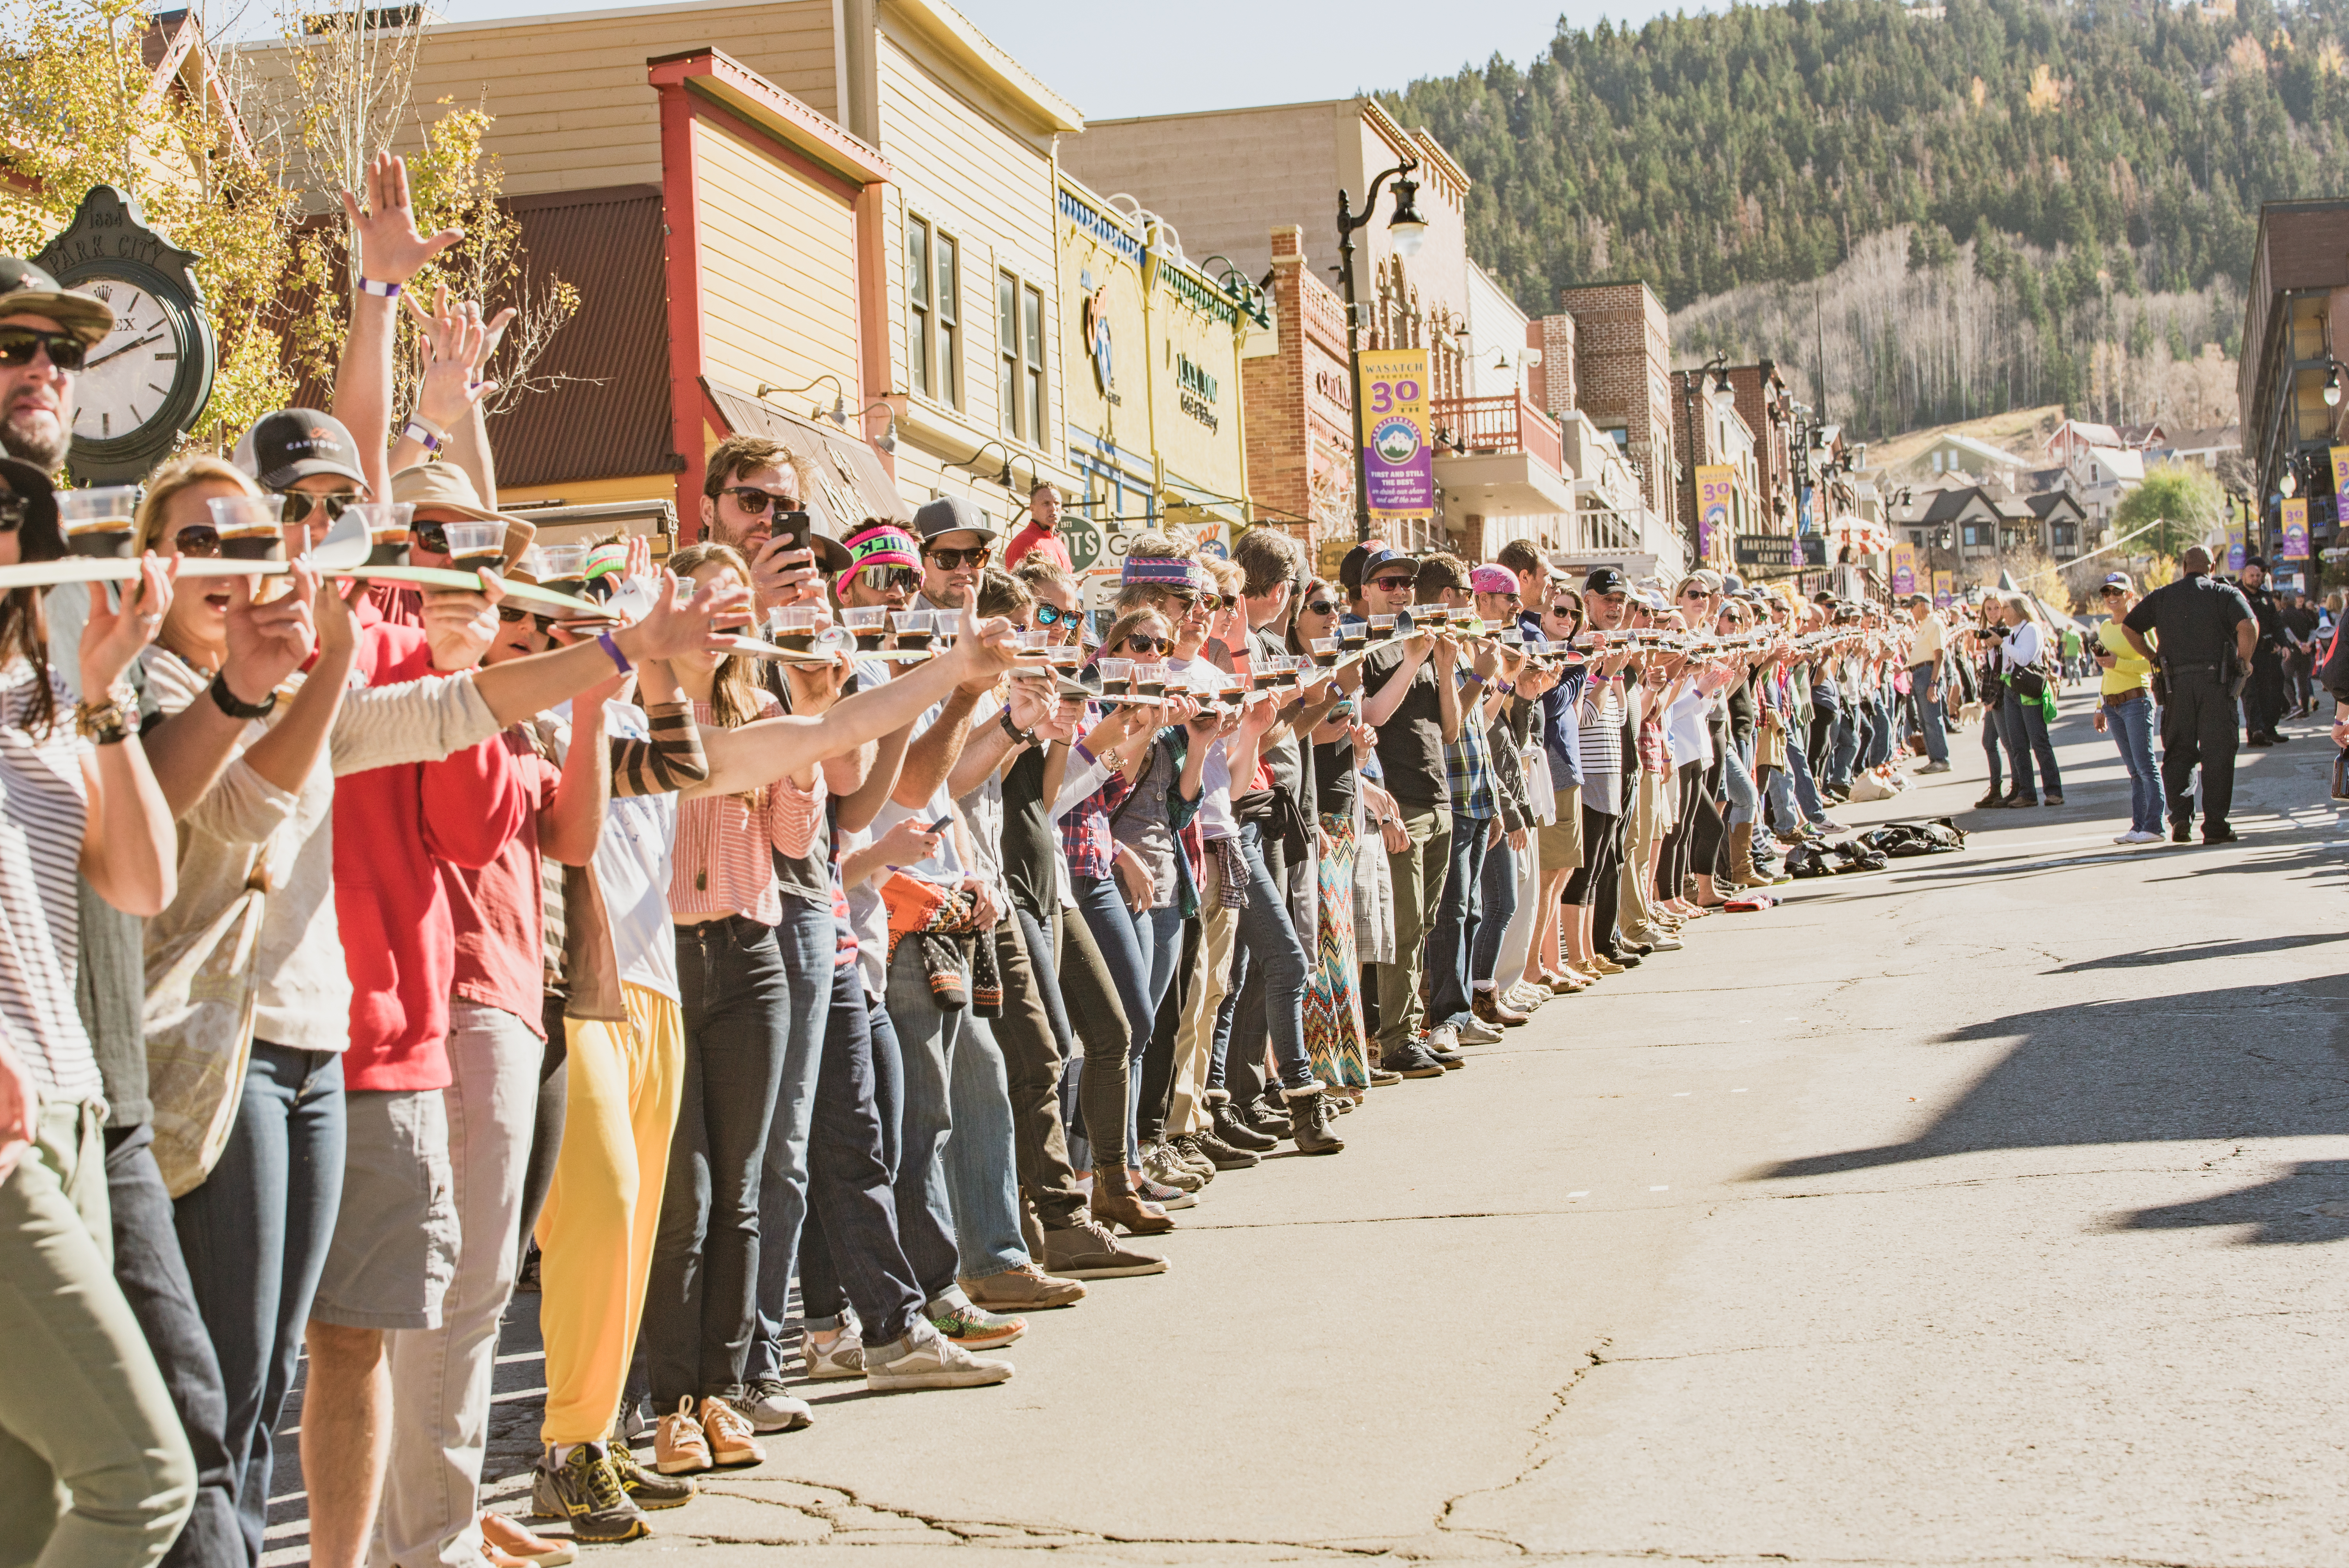 Wasatch Brewery Breaks World Record for Longest Shot Ski